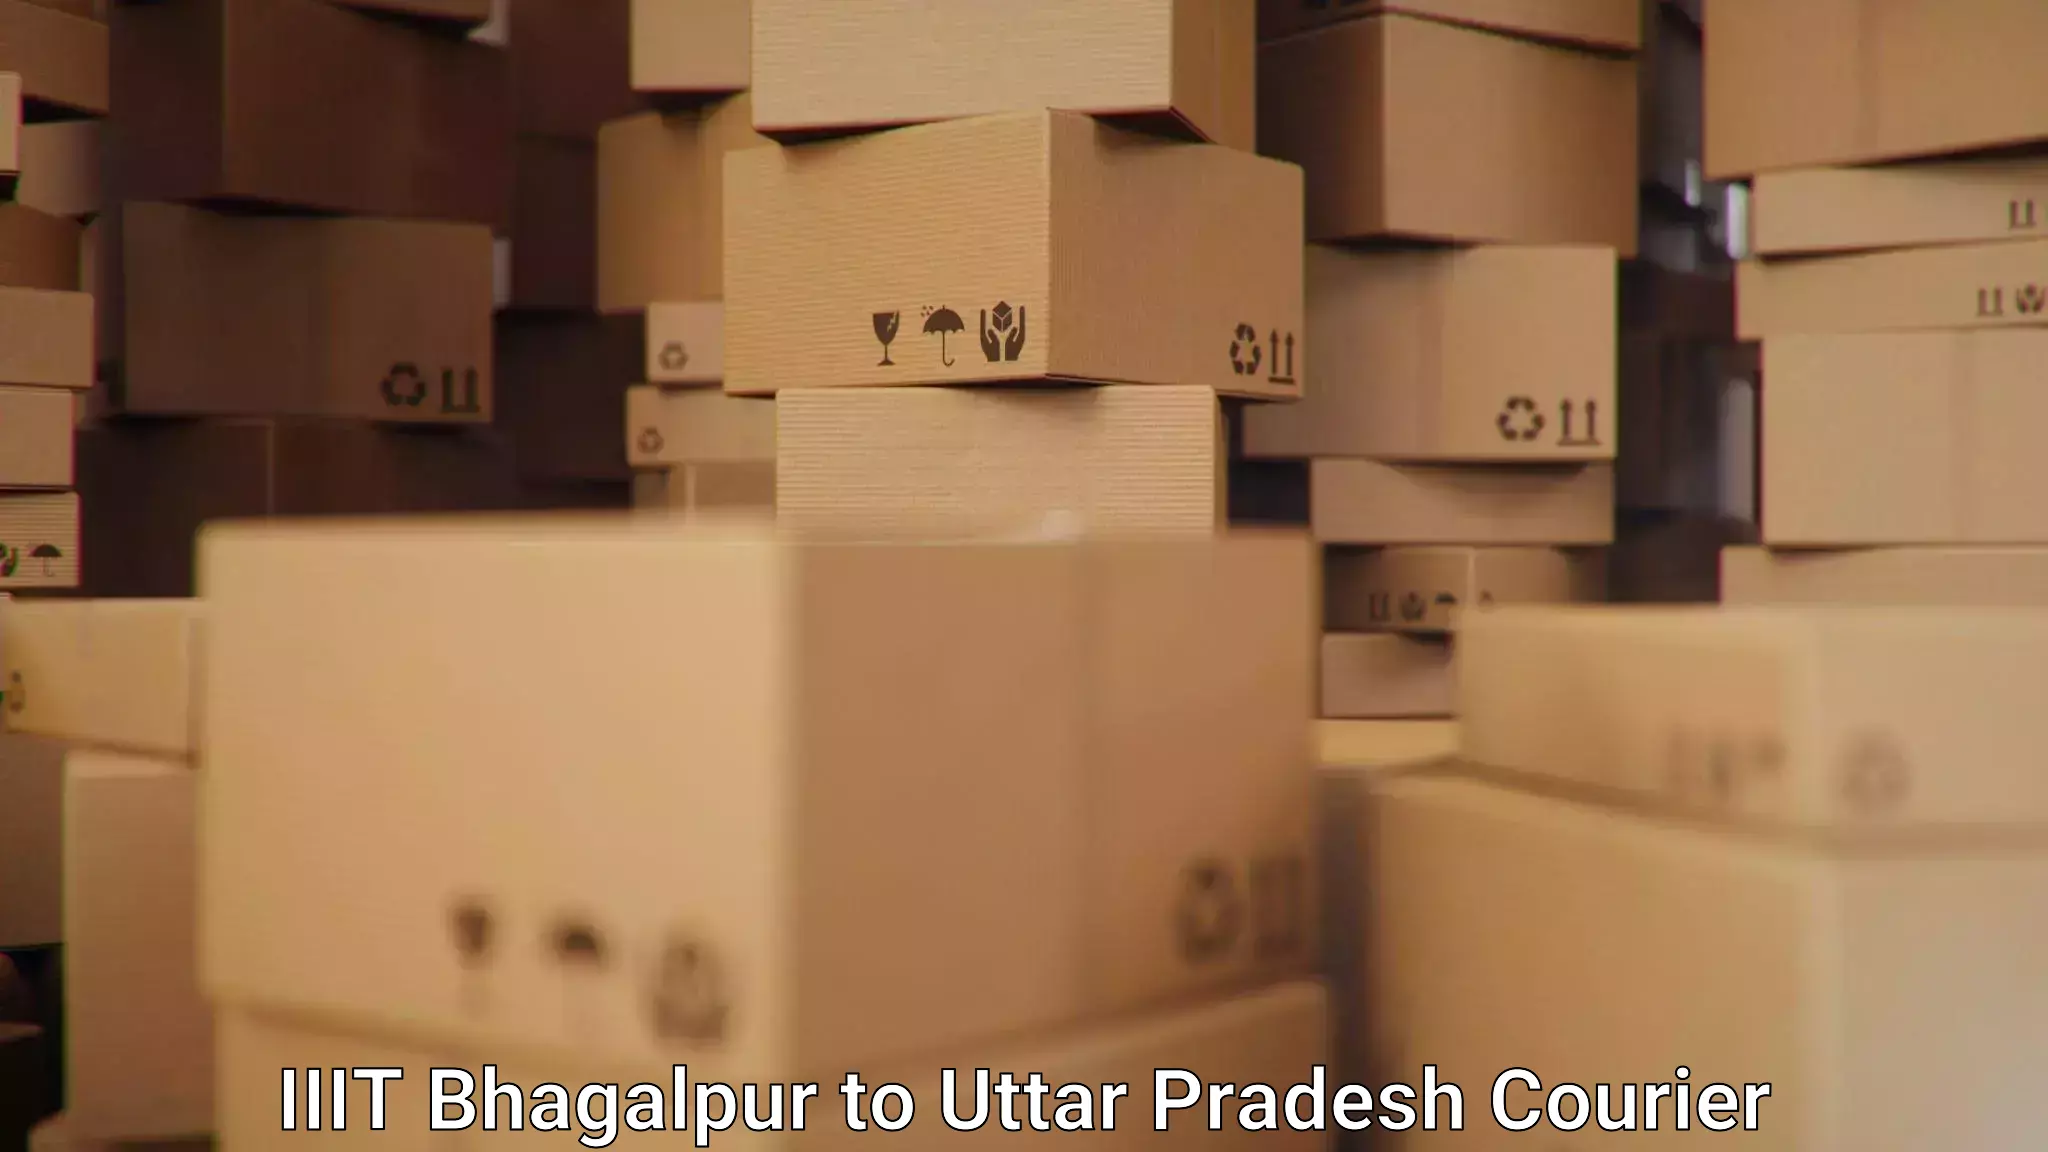 Courier service booking IIIT Bhagalpur to King Georges Medical University Lucknow